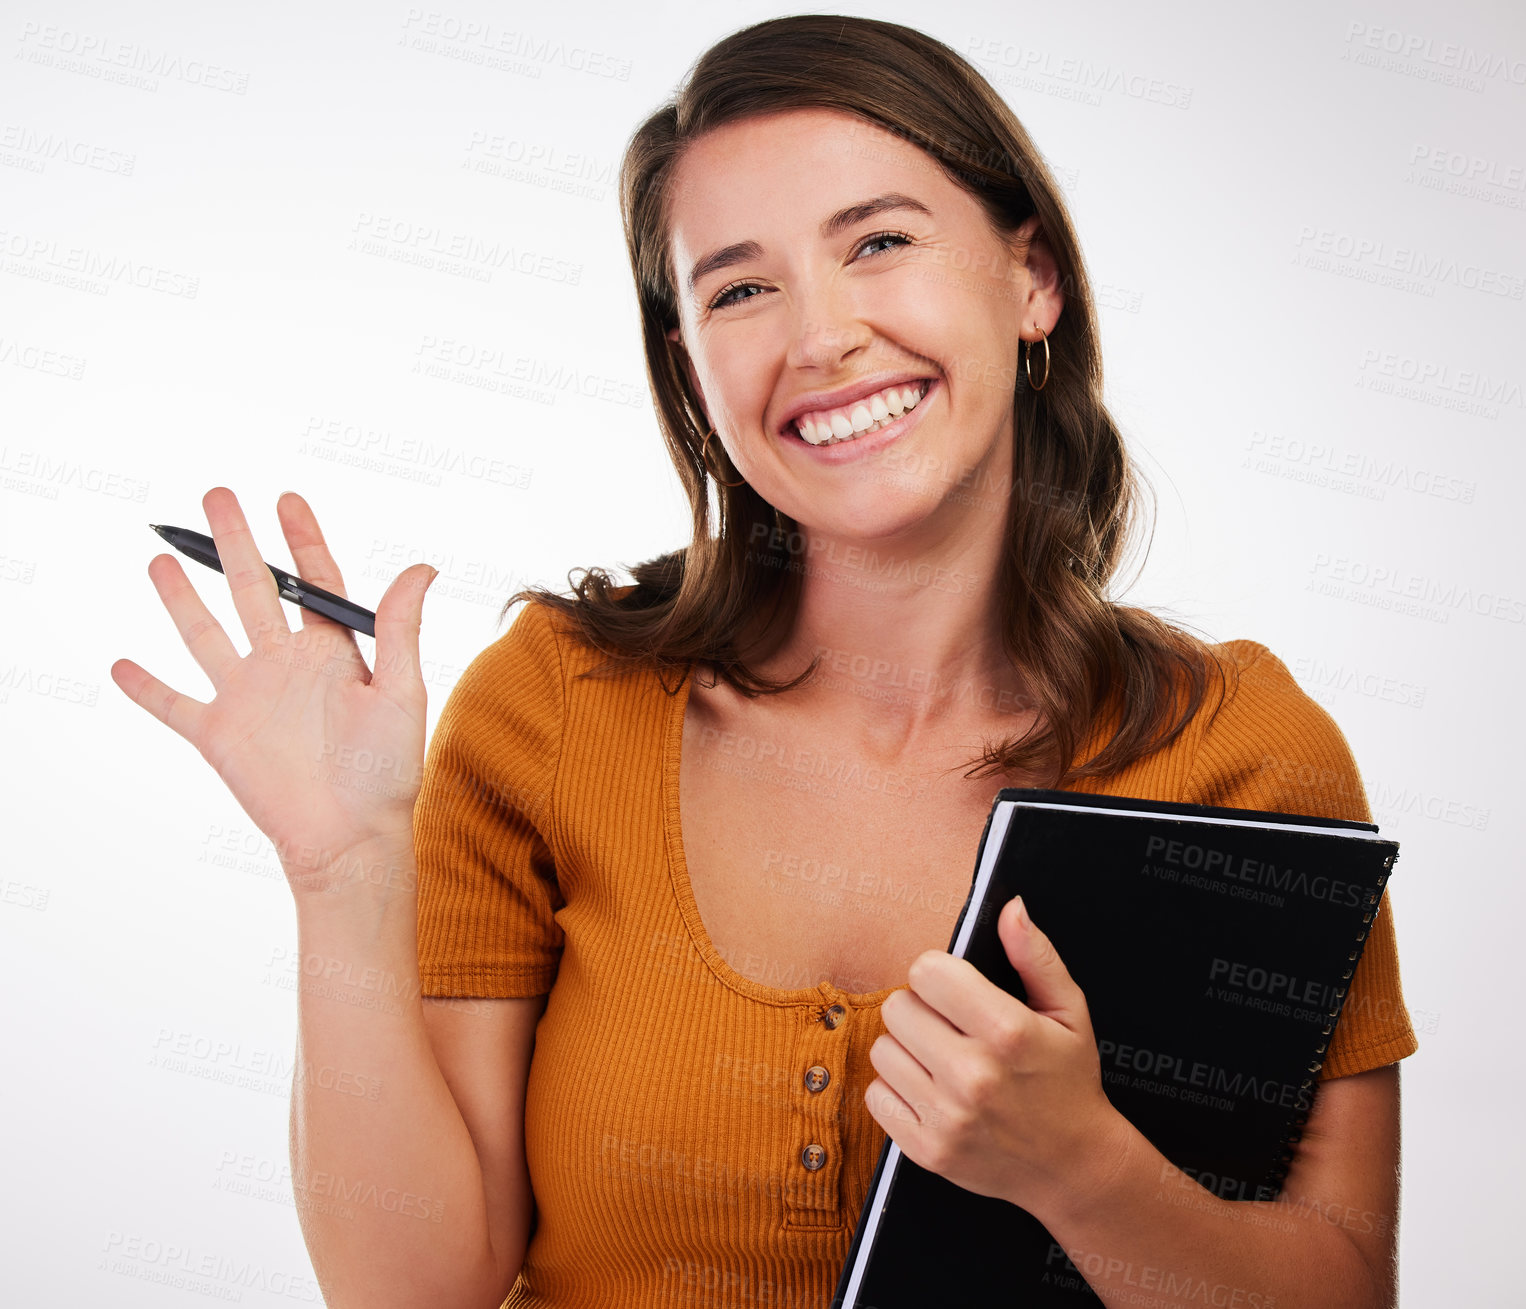 Buy stock photo Studio shot of a young woman holding a book and a pen against a white background